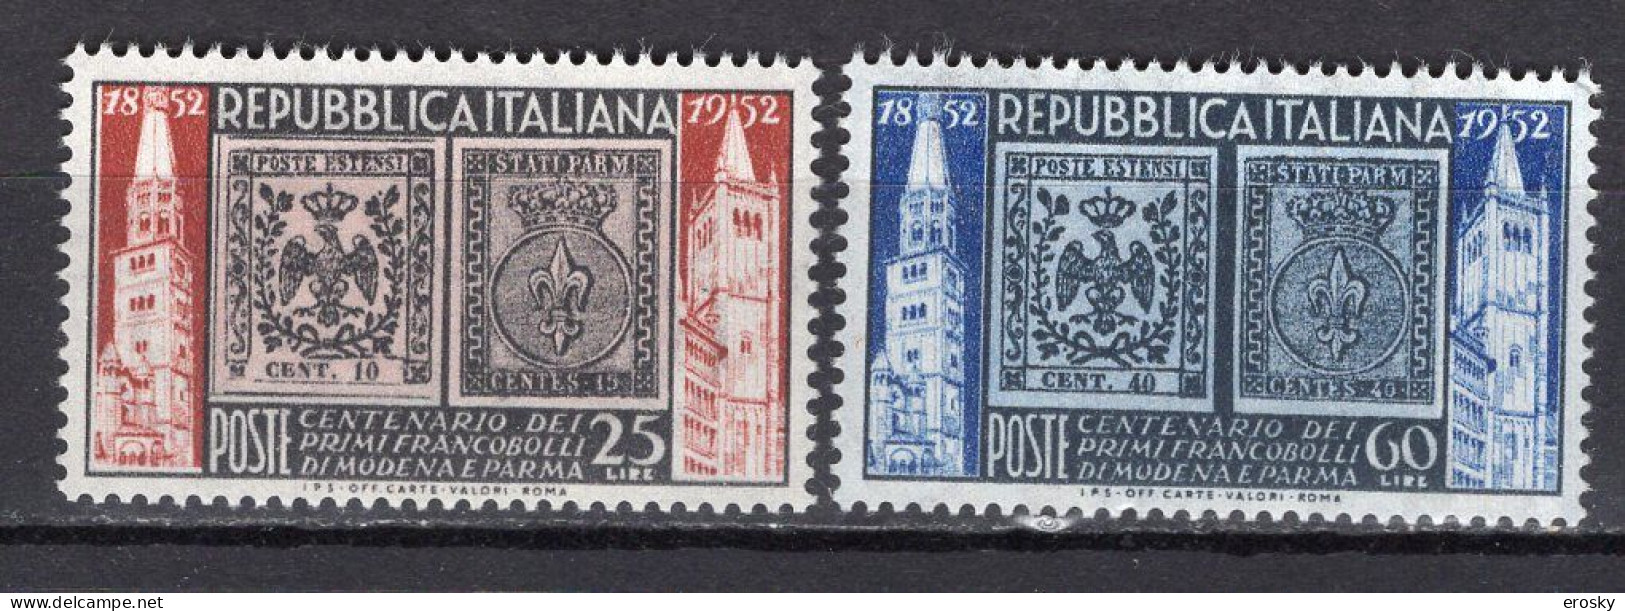 Y0164 - ITALIA Ss N°689/90 - ITALIE Yv N°627/28 ** TIMBRES DE MODENA ET PARMA - 1946-60: Mint/hinged